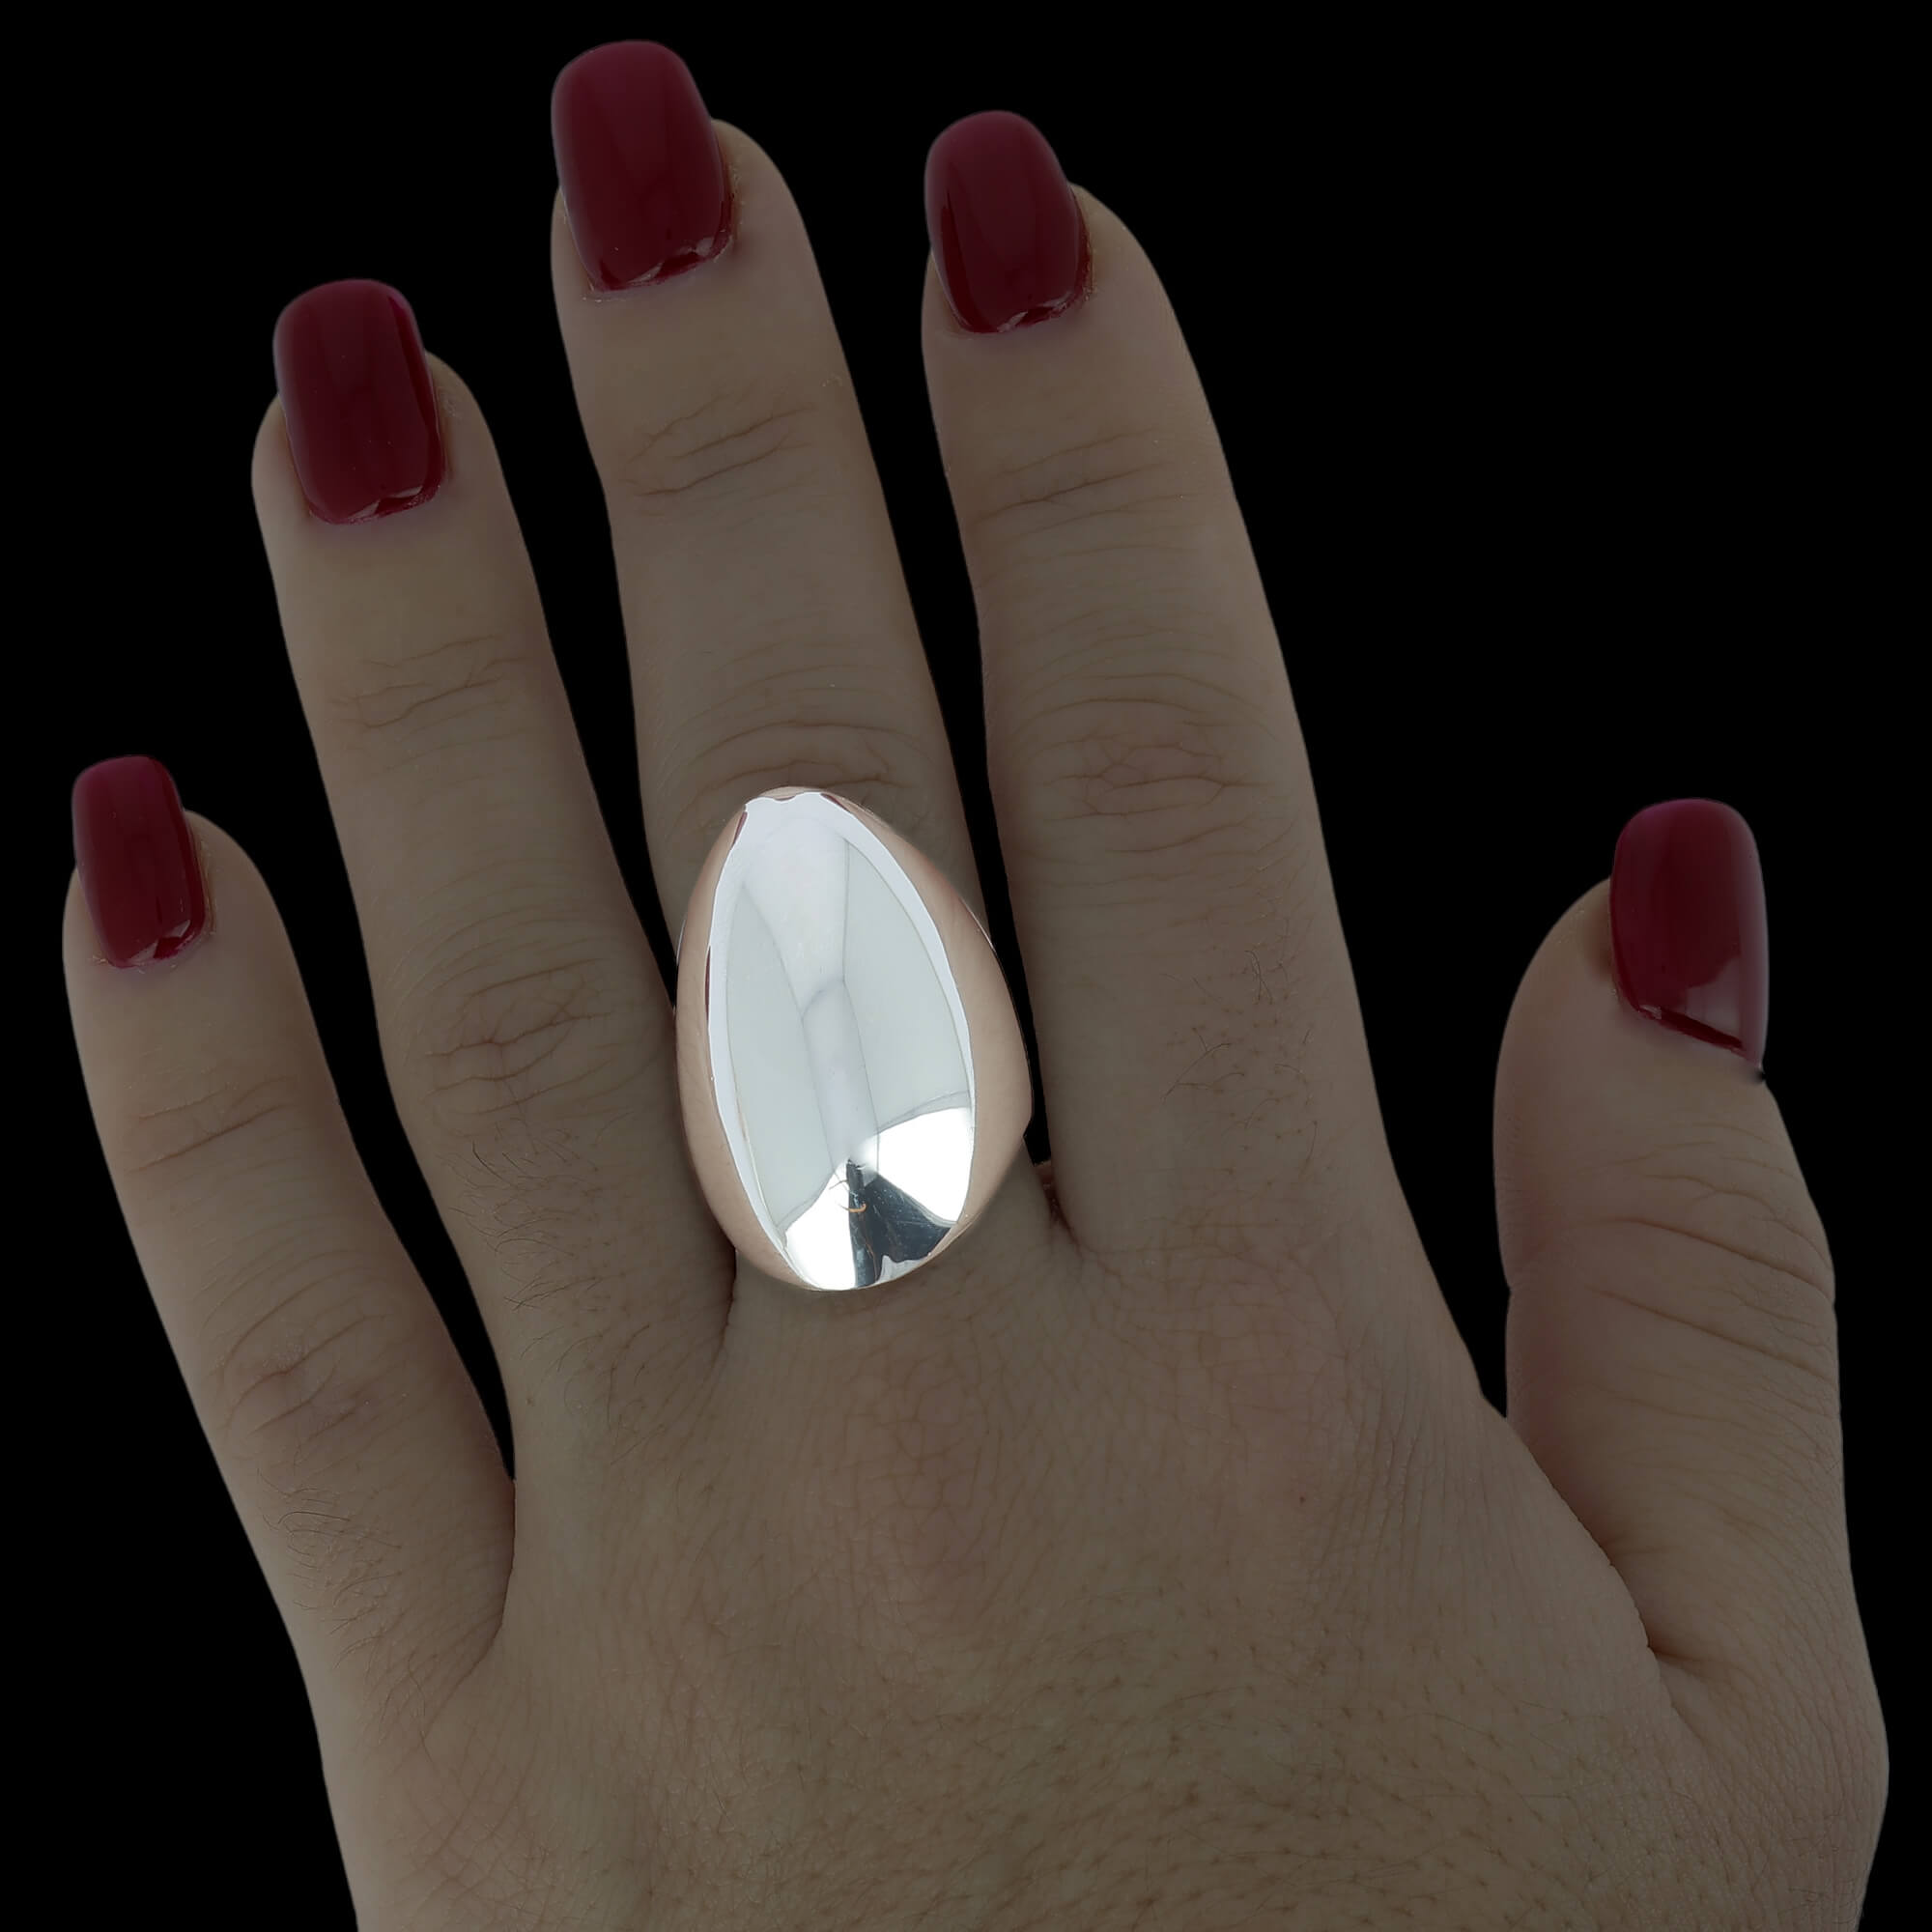 Tight silver polished and elongated ring